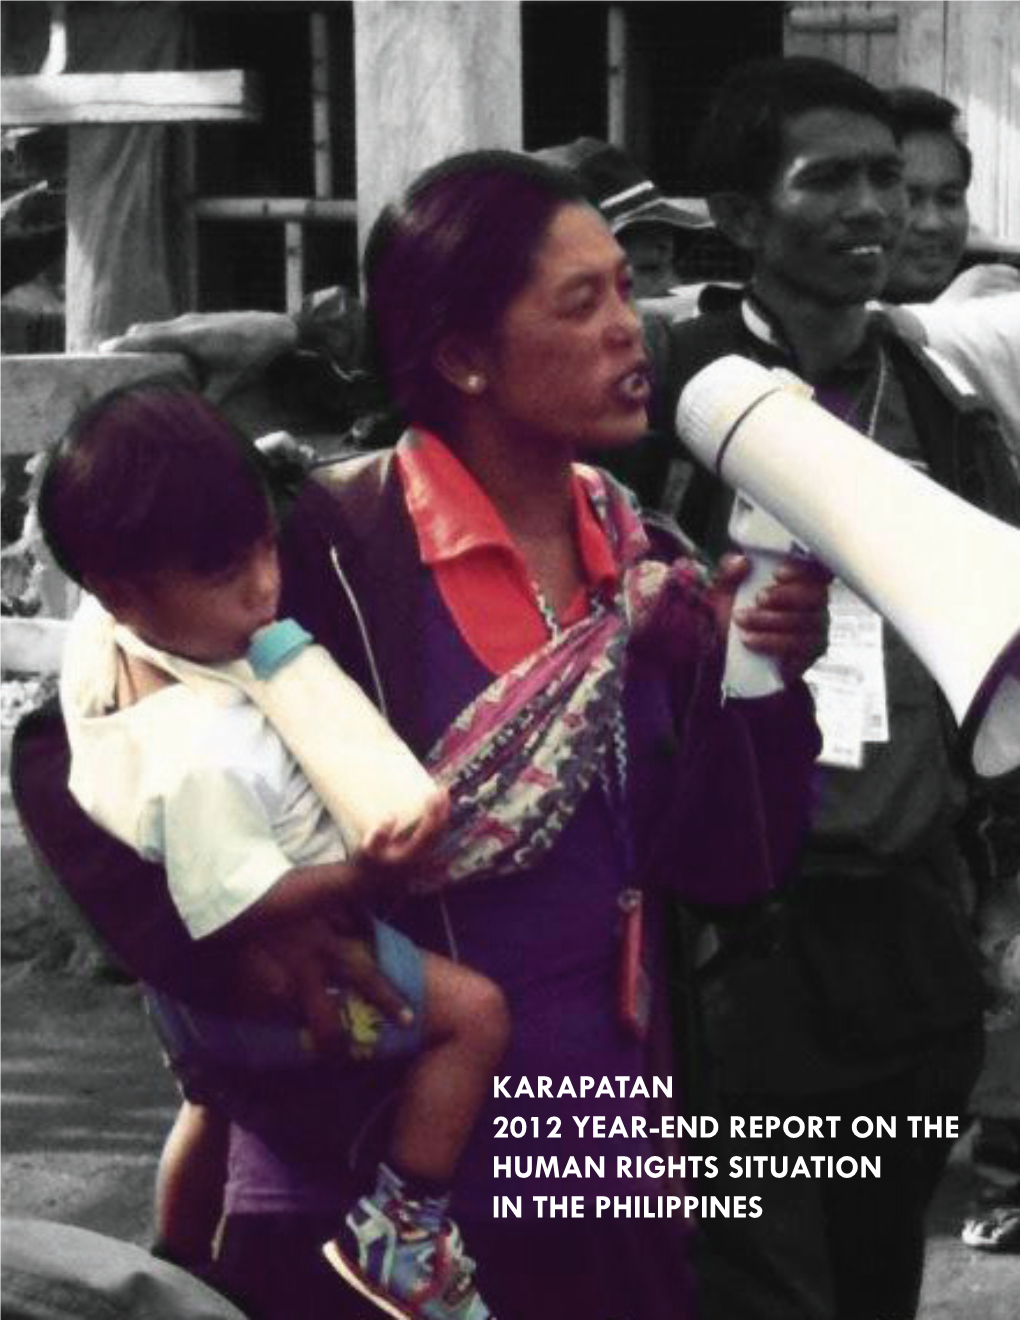 KARAPATAN 2012 YEAR-END REPORT on the HUMAN RIGHTS SITUATION in the PHILIPPINES Contents